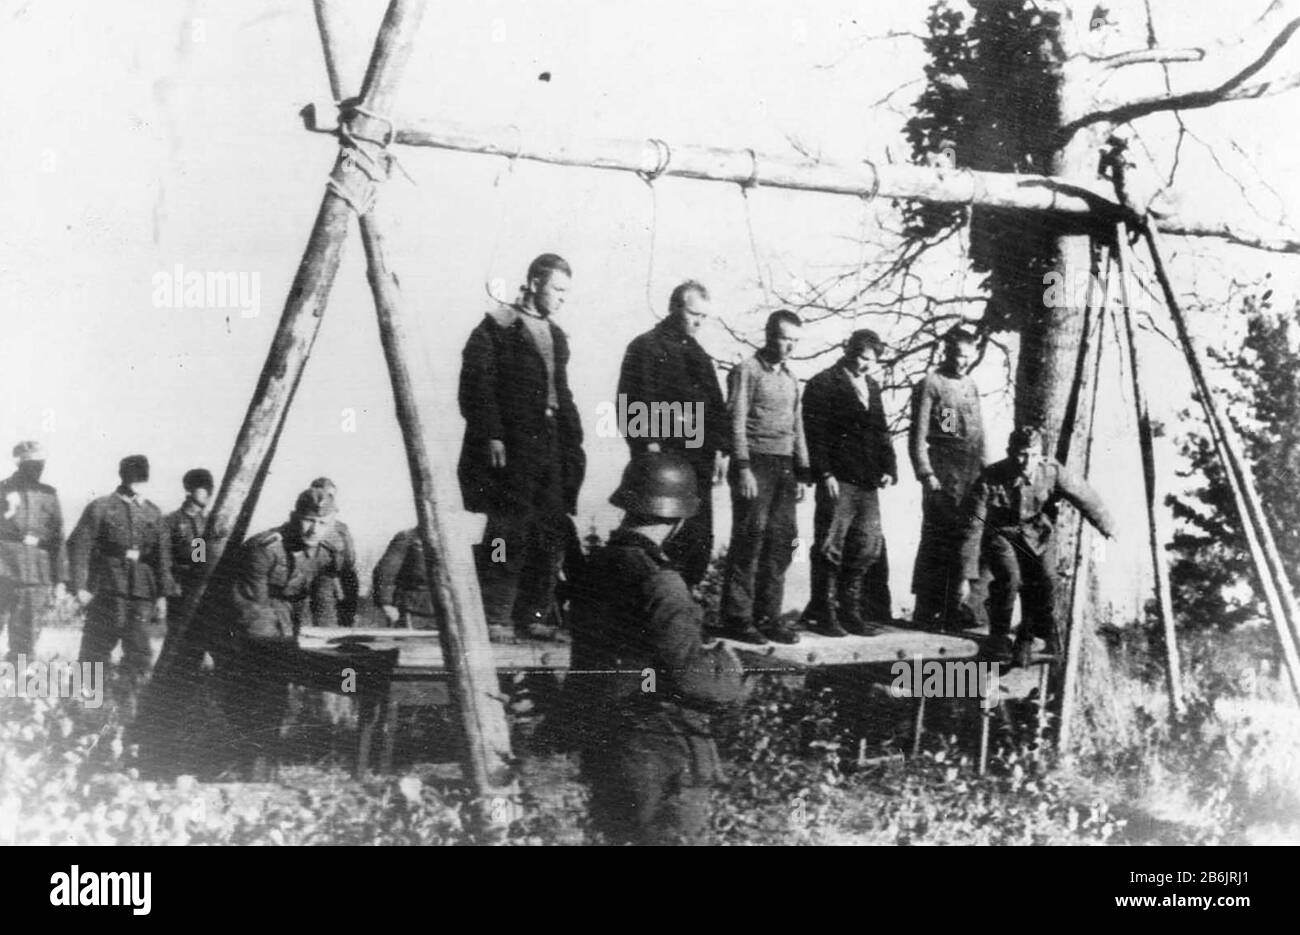 GERMANS HANG SOVIET CIVILIANS. Five Russians await hanging near the town of Velizh in the Smolensk region of NW Russia in September 1941. German soldiers await the order to tip over the makeshift platform while the next group to be executed stand behind blindfolded. In September 1942 German occupation forces murdered all but 17 of the town's 1440 Jewish population. Stock Photo